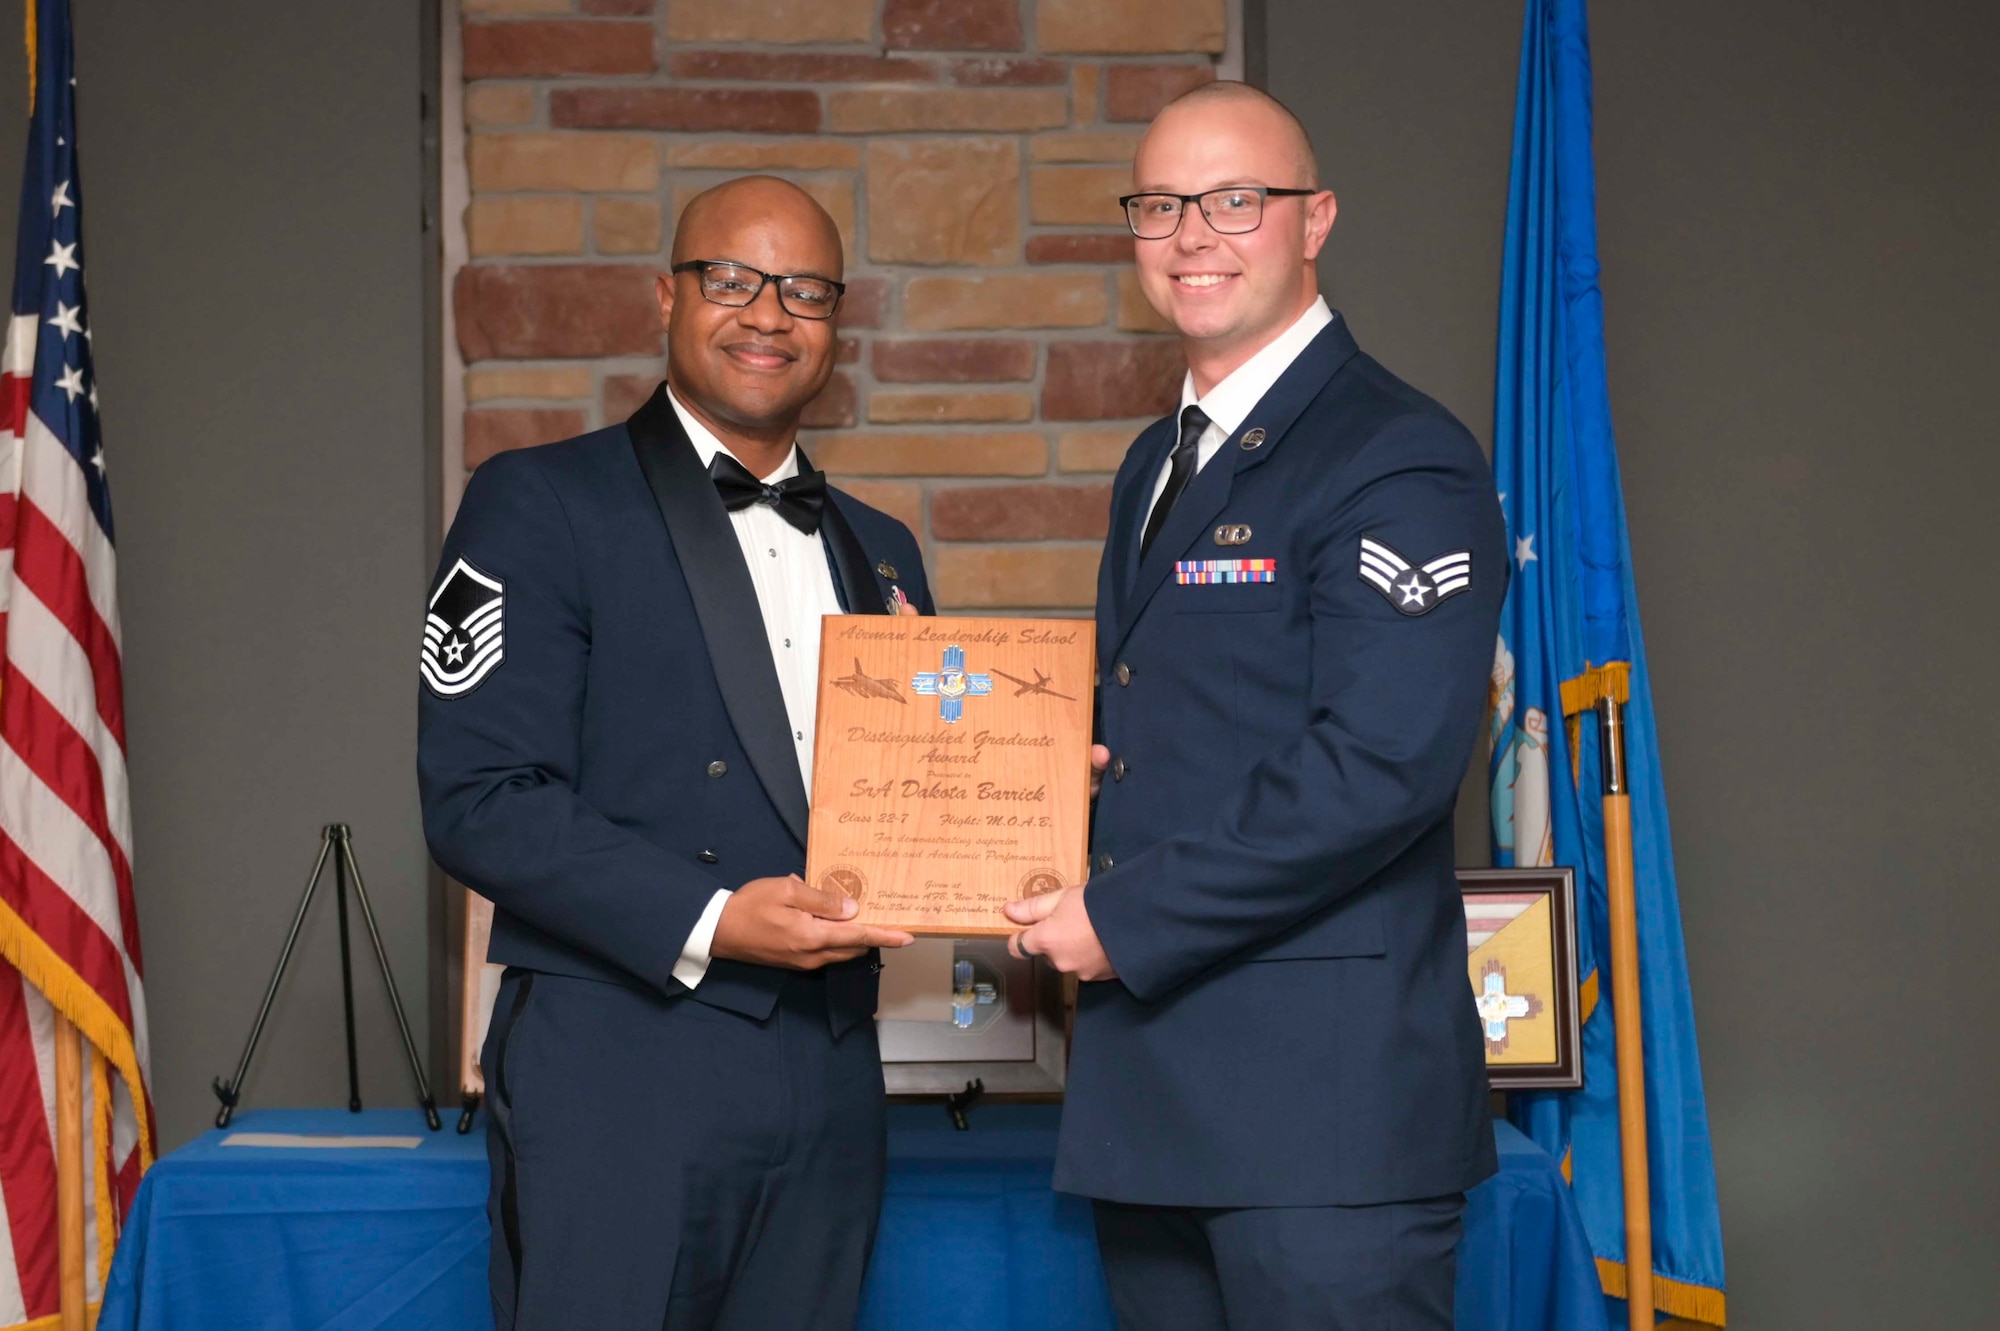 U.S. Air Force Senior Airman Dakota Barrick, right, accepts the Distinguished Graduate Award from Holloman Top III representative Master Sgt. Troy Campbell during an Airman Leadership School graduation at Holloman Air Force Base, New Mexico, Sept. 22, 2022. The distinguished graduate award is presented to the top ten-percent of graduates for their performance in academic evaluations and demonstration of leadership. (U.S. Air Force photo by Tech. Sgt. Victor J. Caputo)